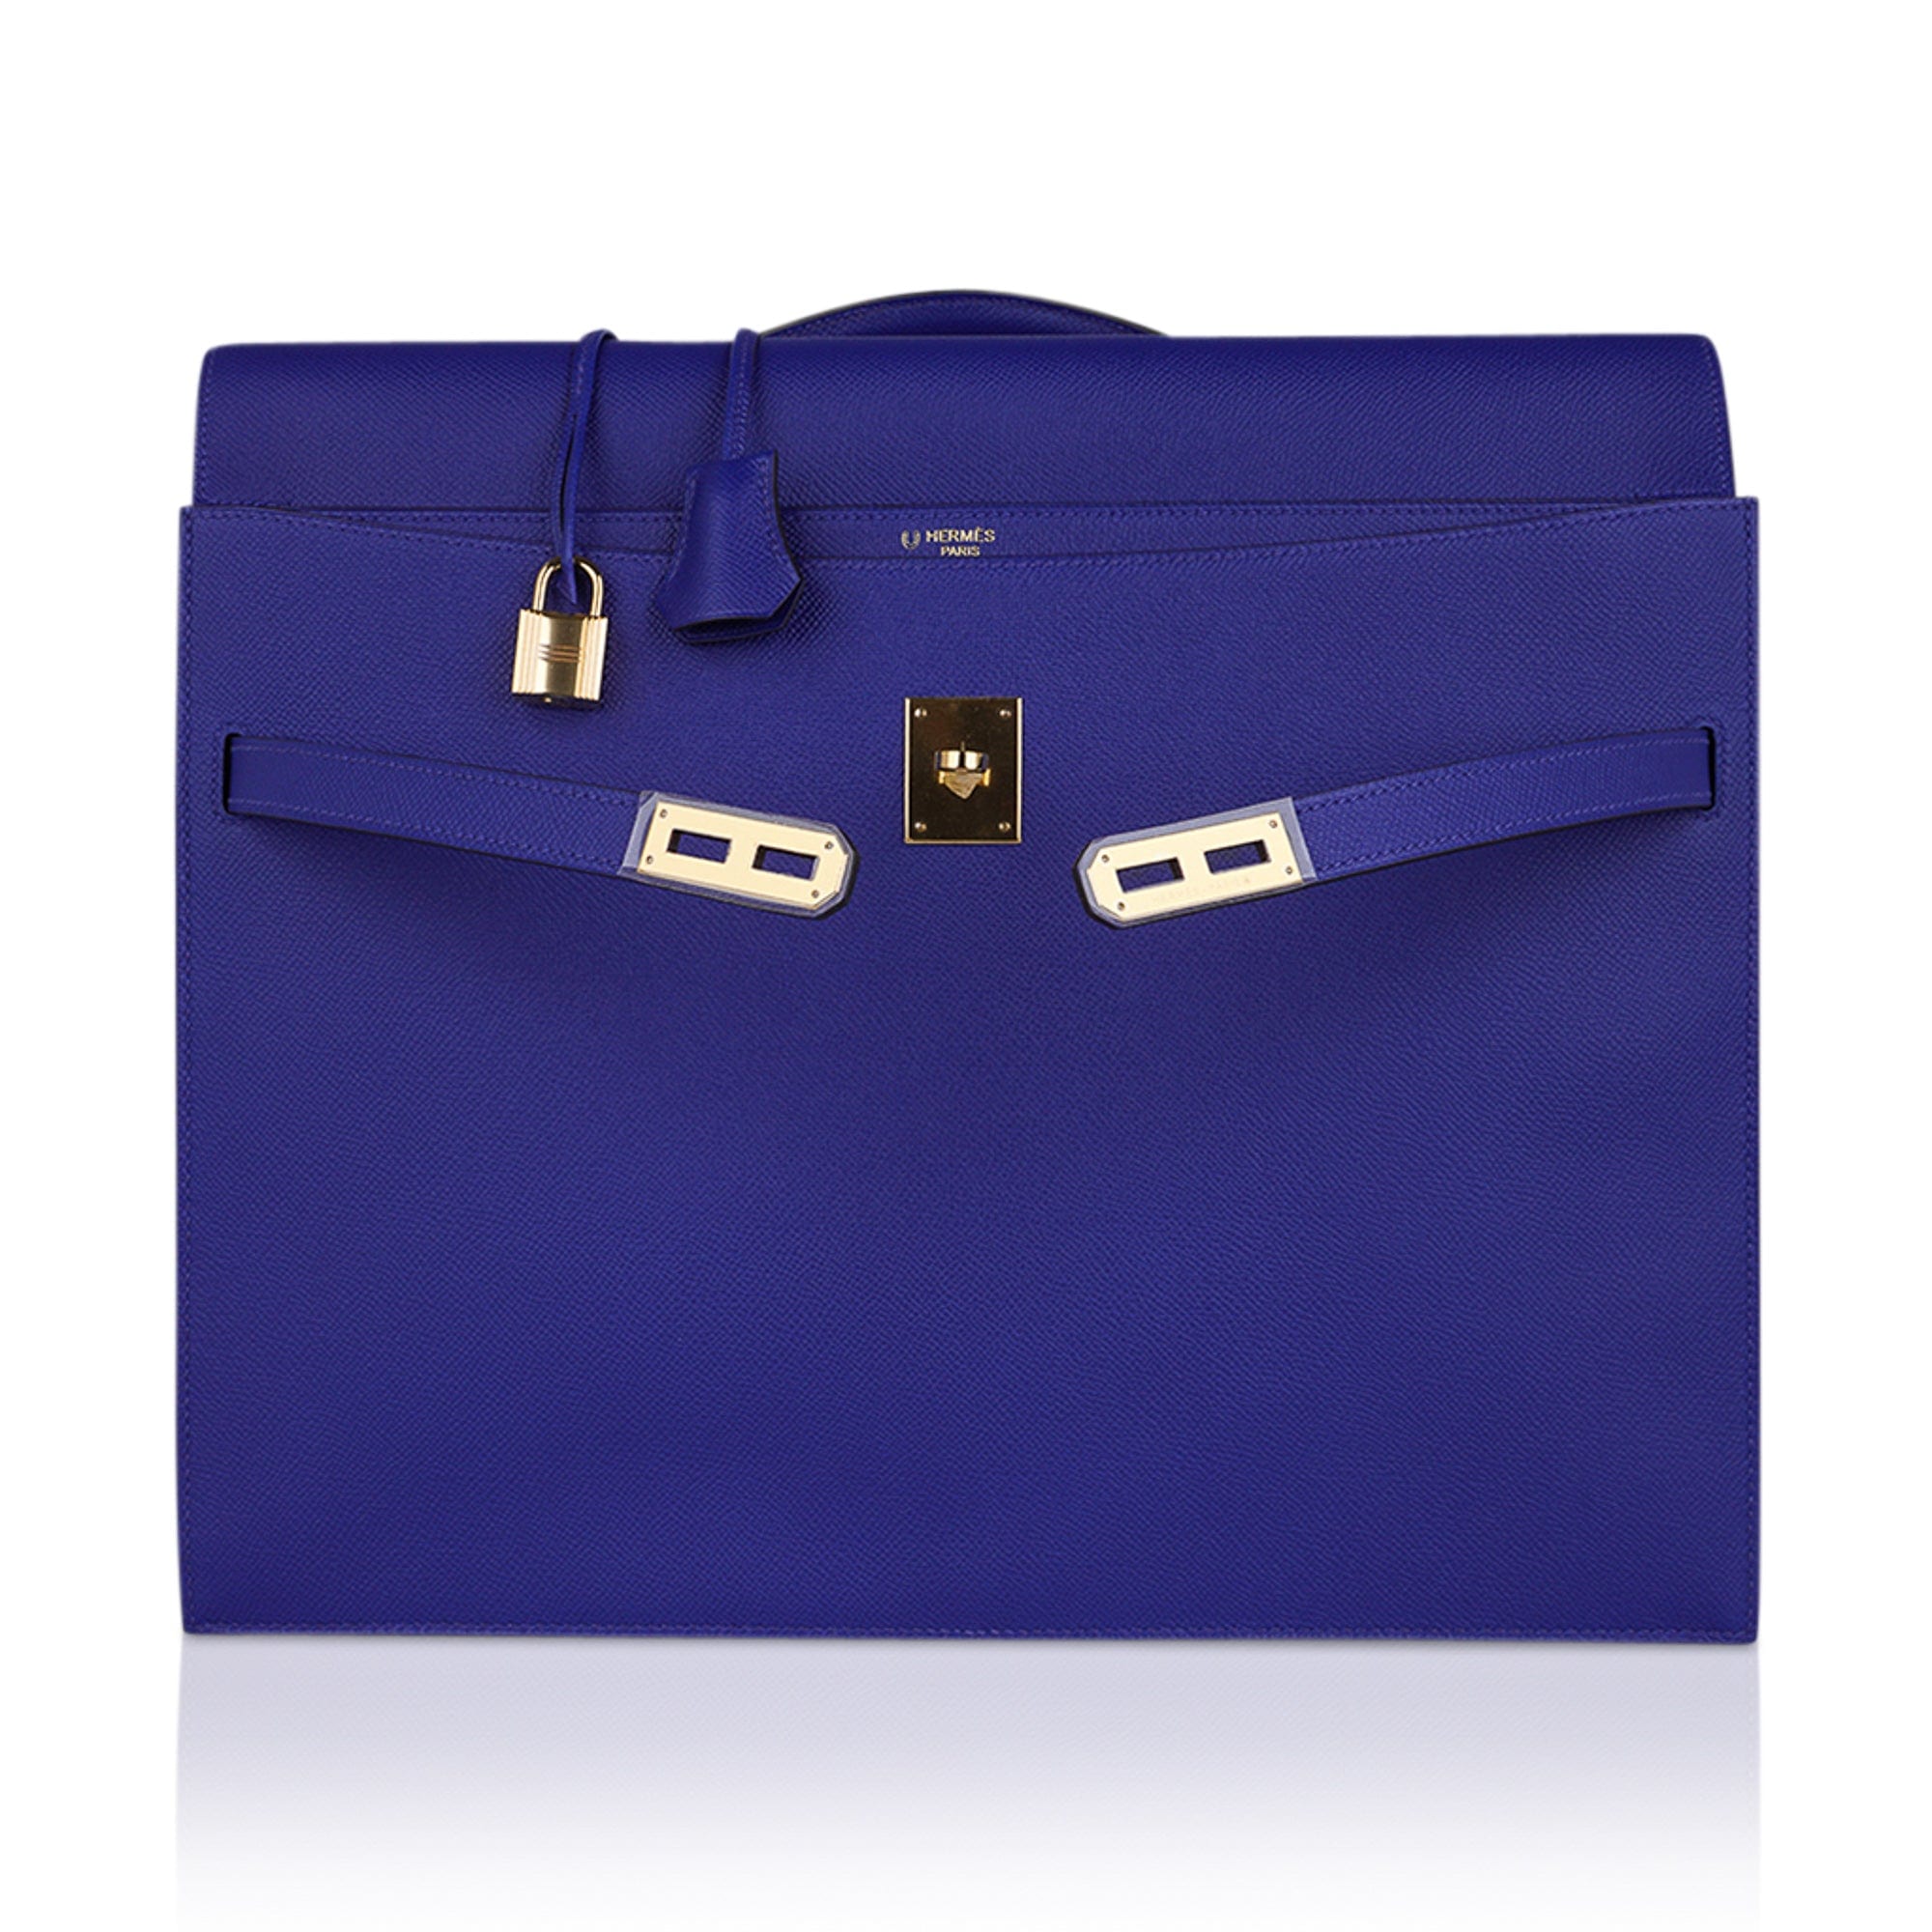 AUTHENTIC HERMES KELLY 28 ETOUPE CLEMENCE IN GOLD HARDWARE, Luxury